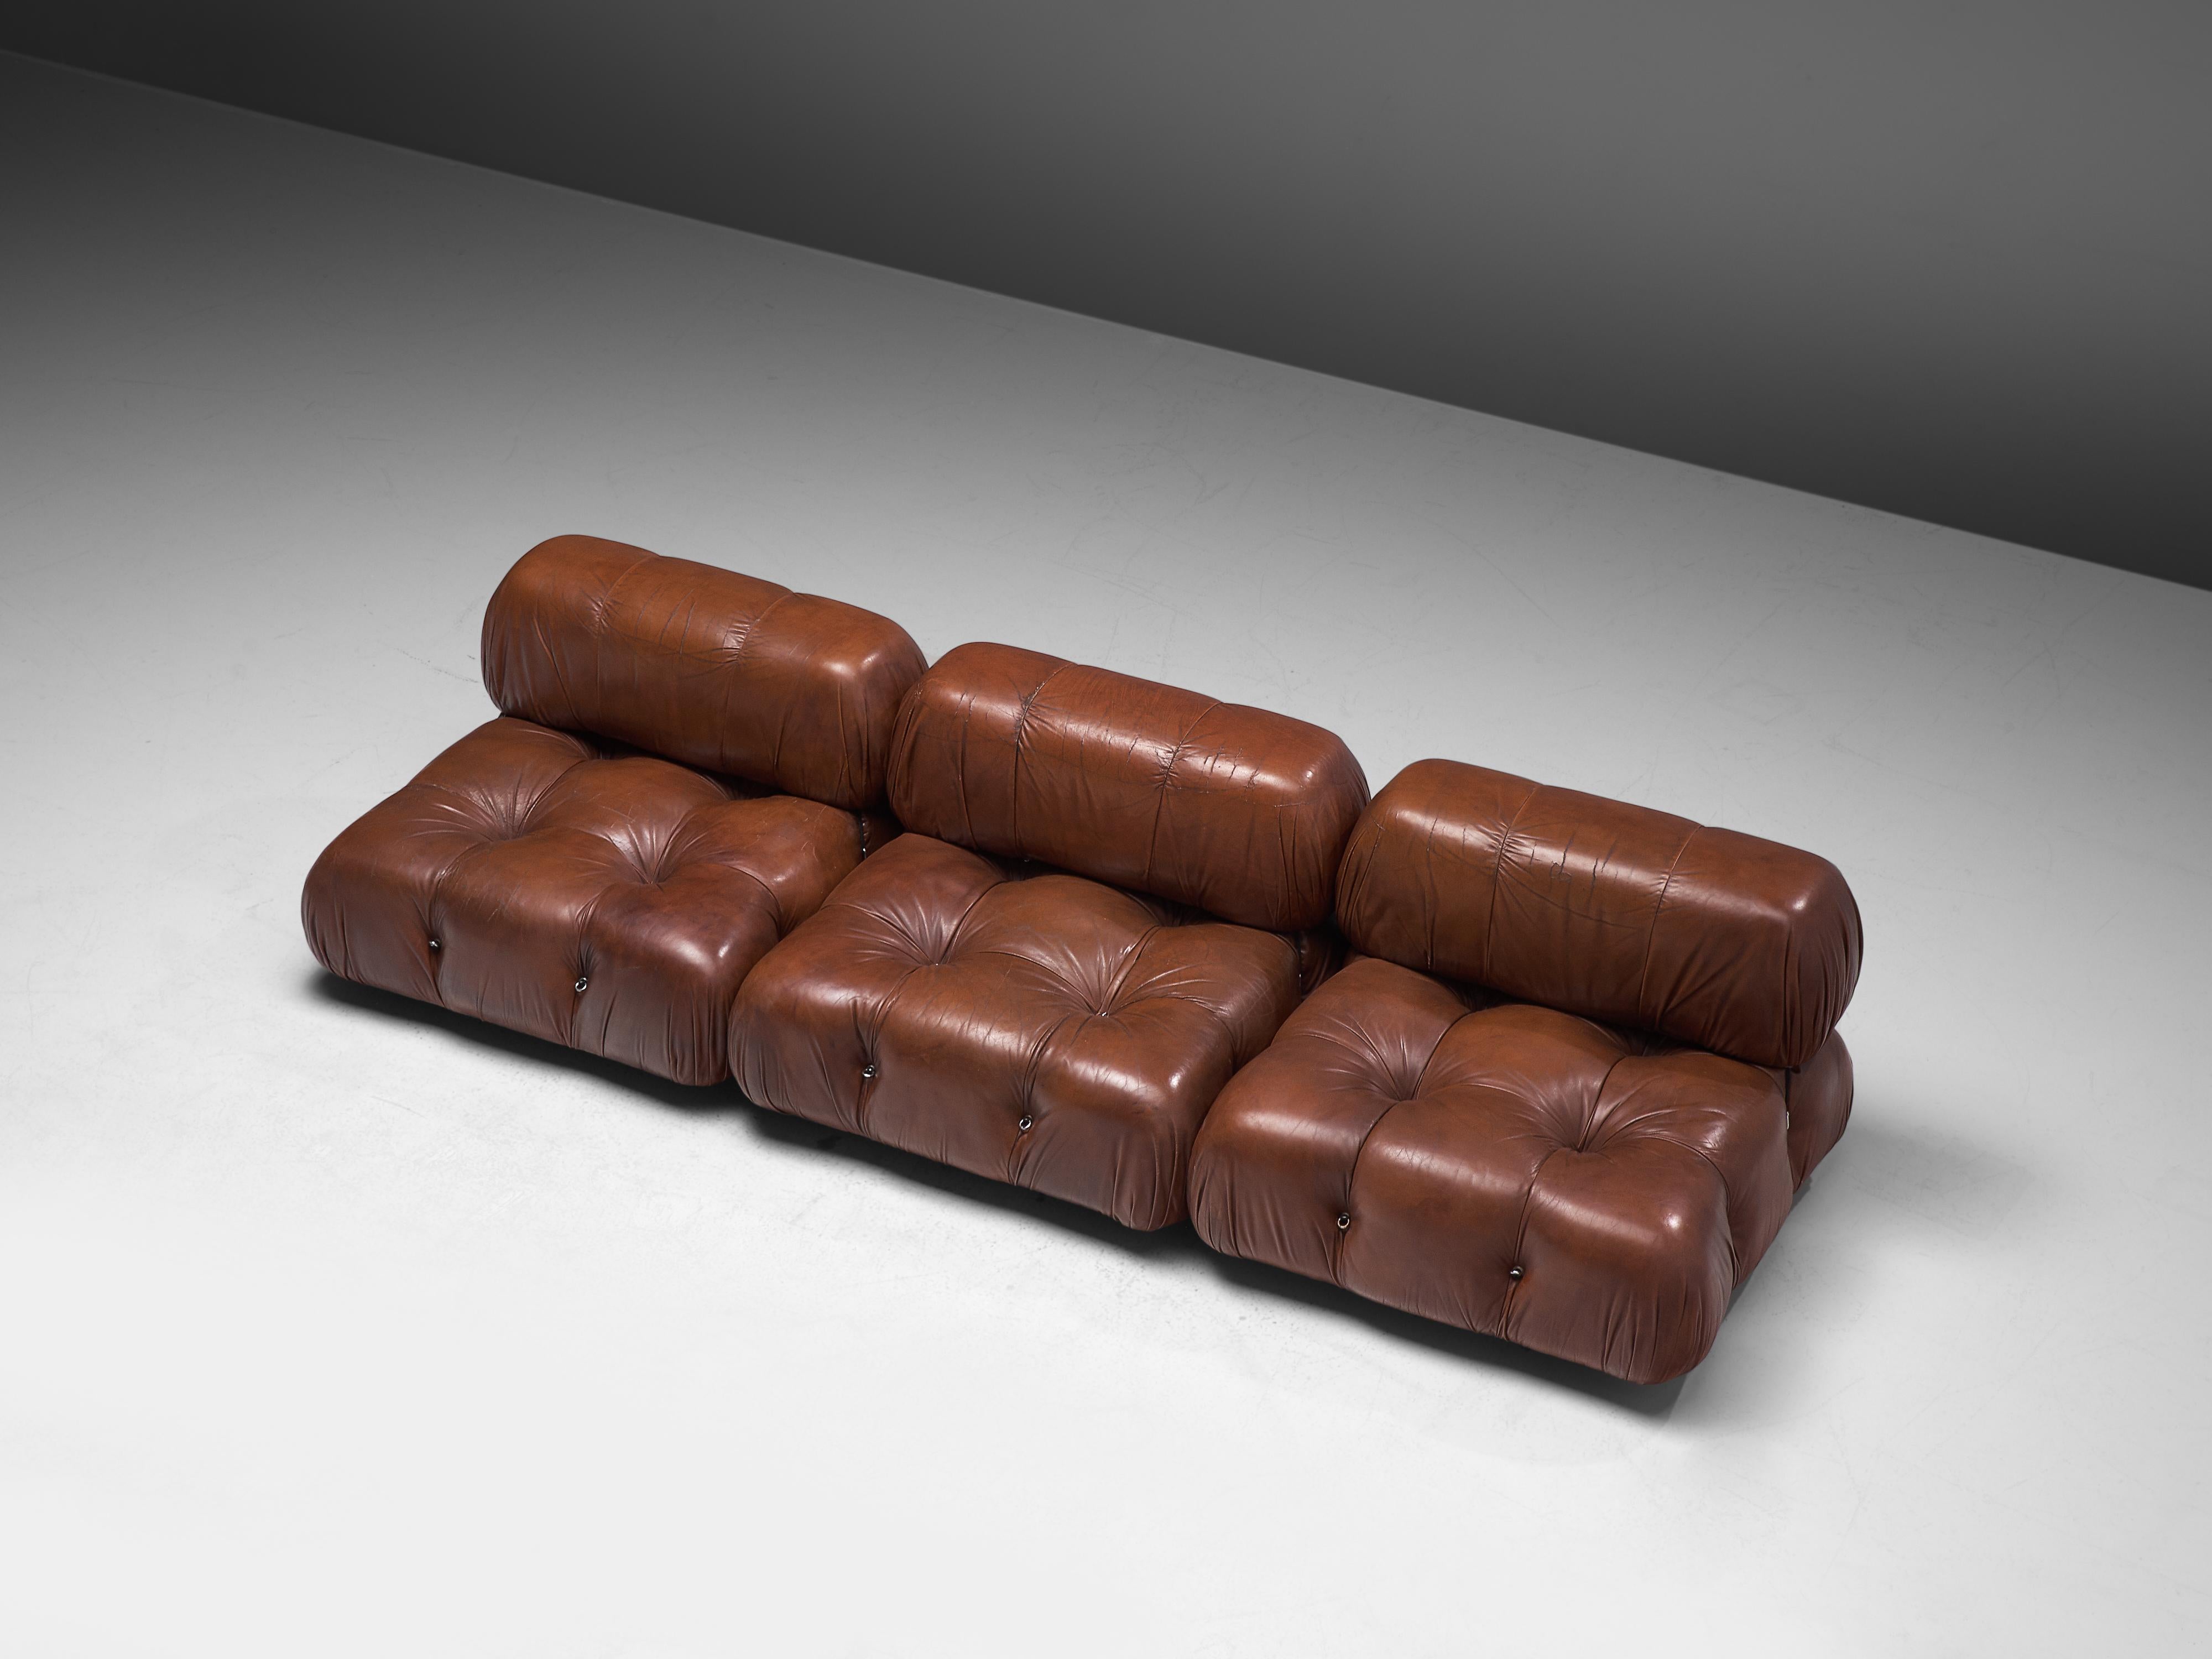 Mario Bellini, modular 'Cameleonda' sofa, brown leather, Italy, designed in 1972.

The sectional elements of this sofa can be used freely and apart from one another. The backs and armrests are provided with rings and carabiners, which allows the